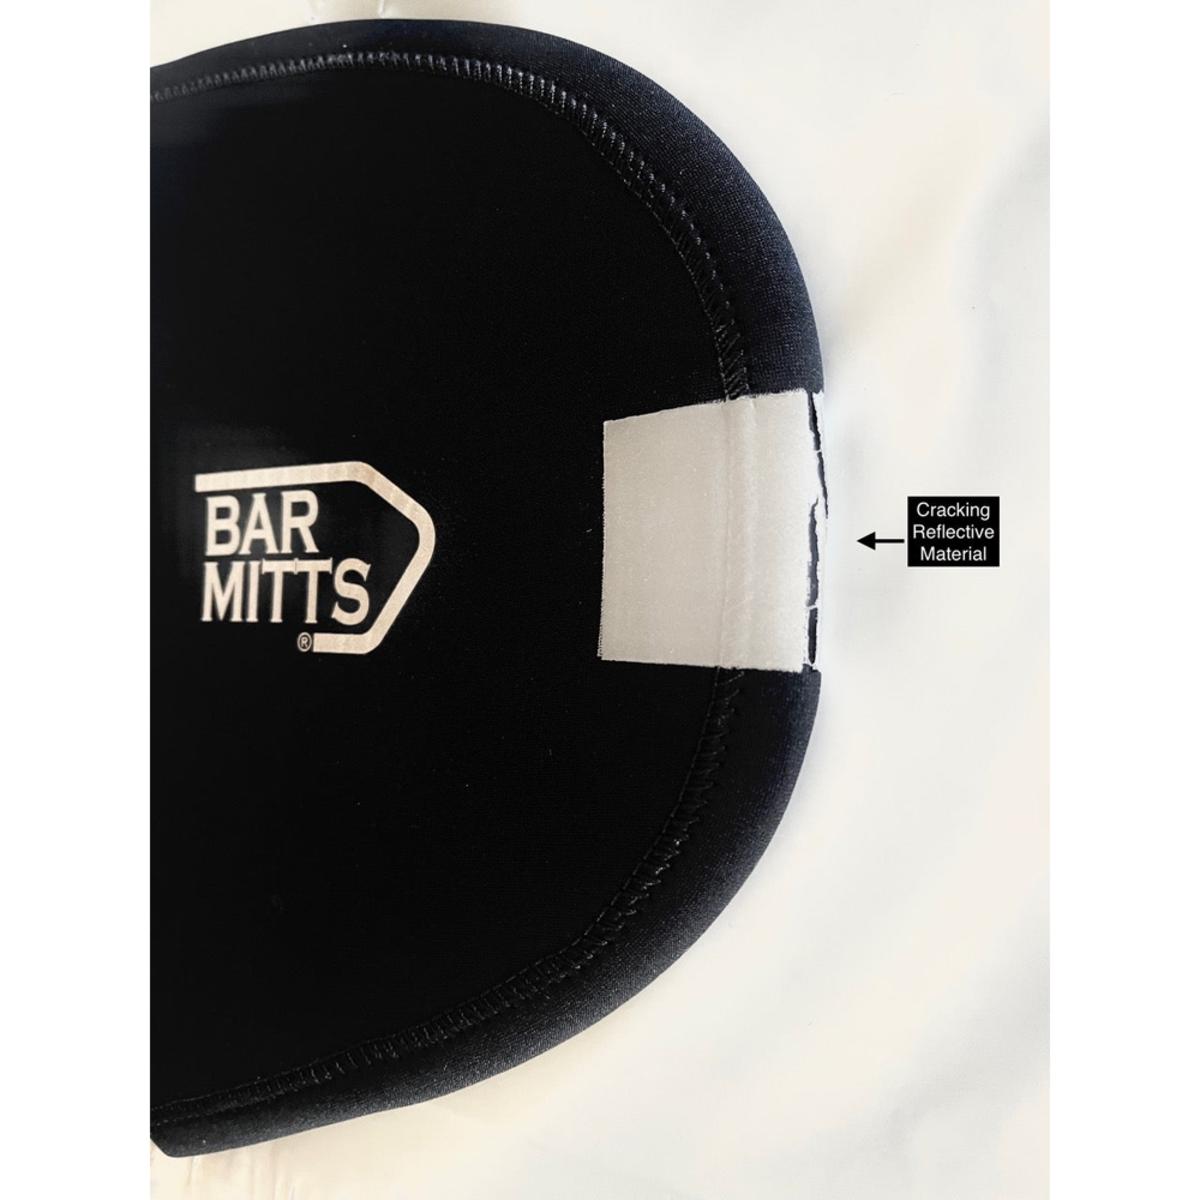 Bar Mitts Older Shimano Externally Routed Cables Dual Position Handlebar Mittens Extreme - Black